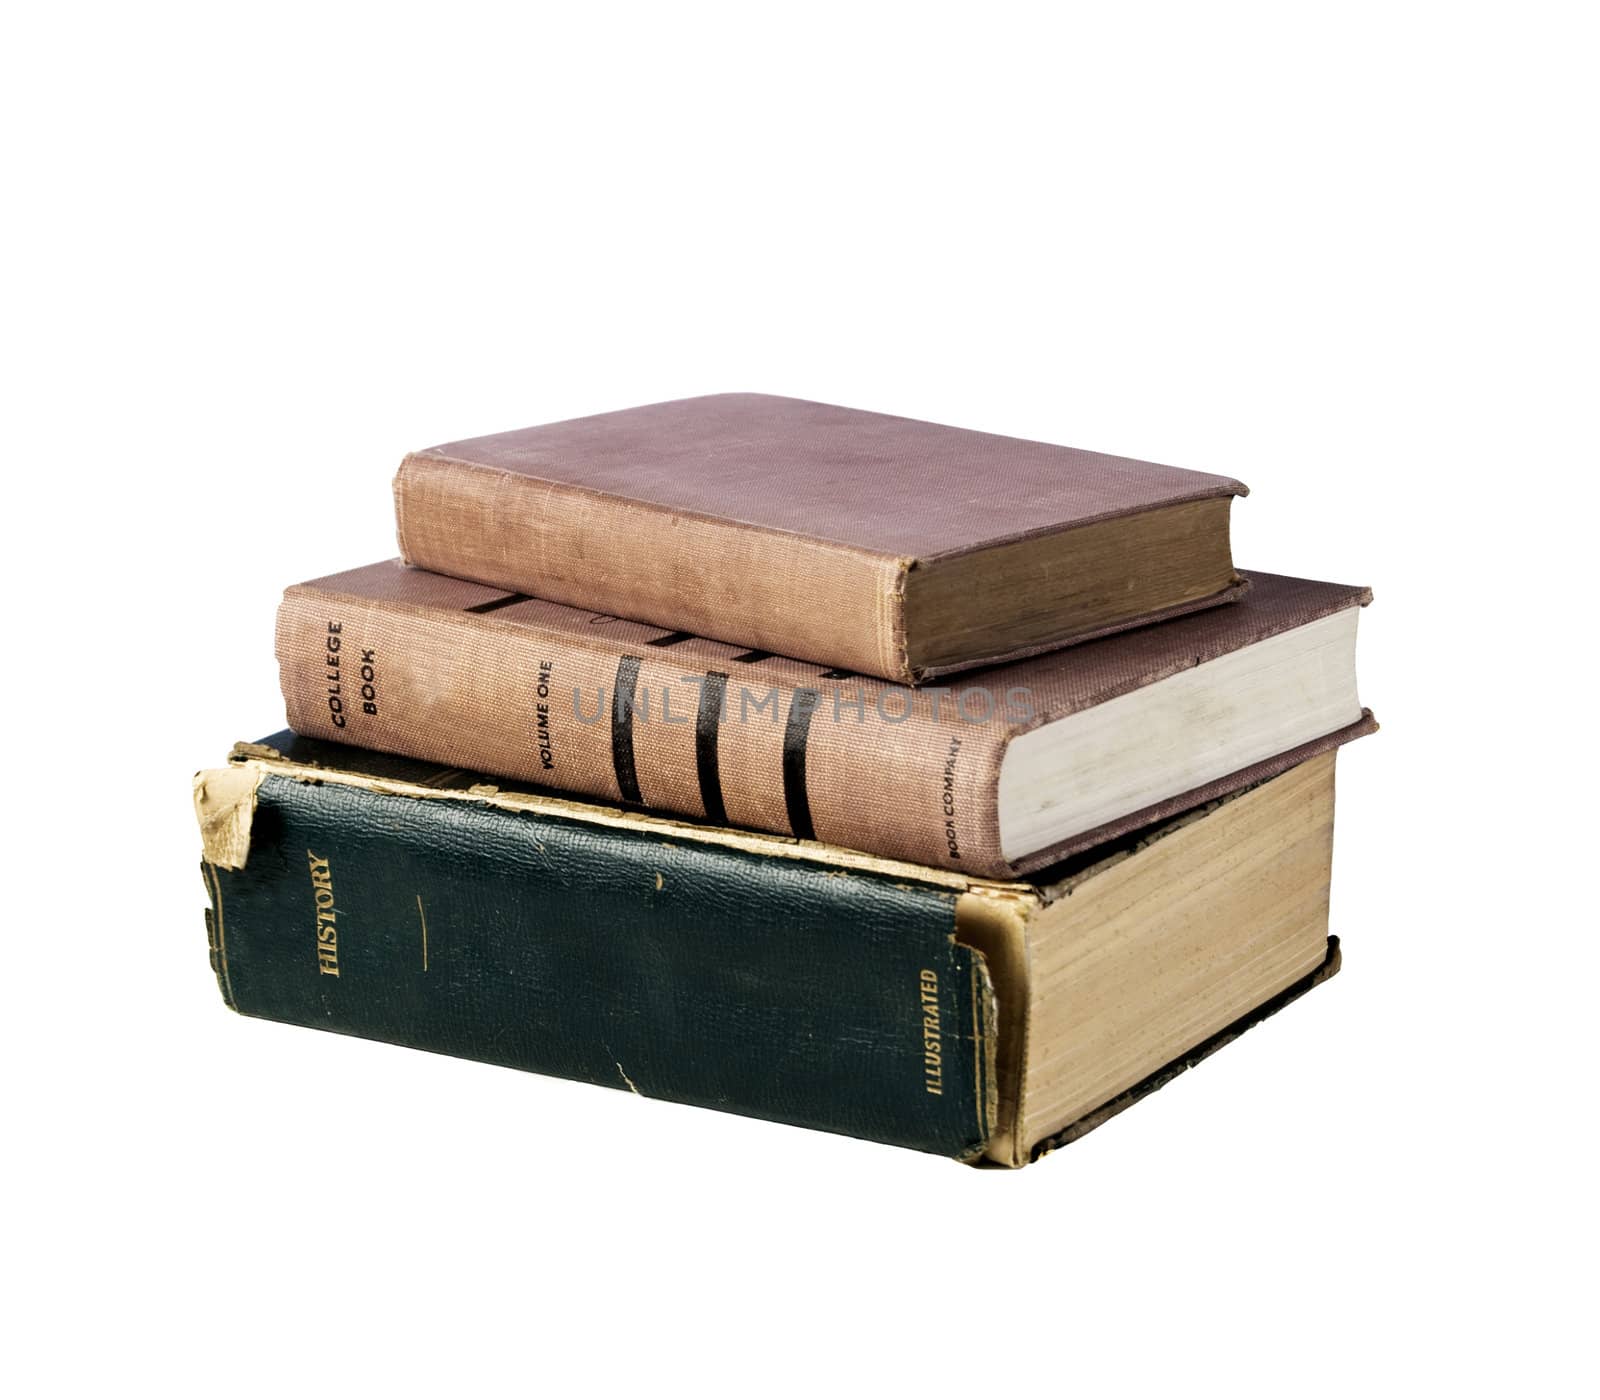 Three old books by rcarner